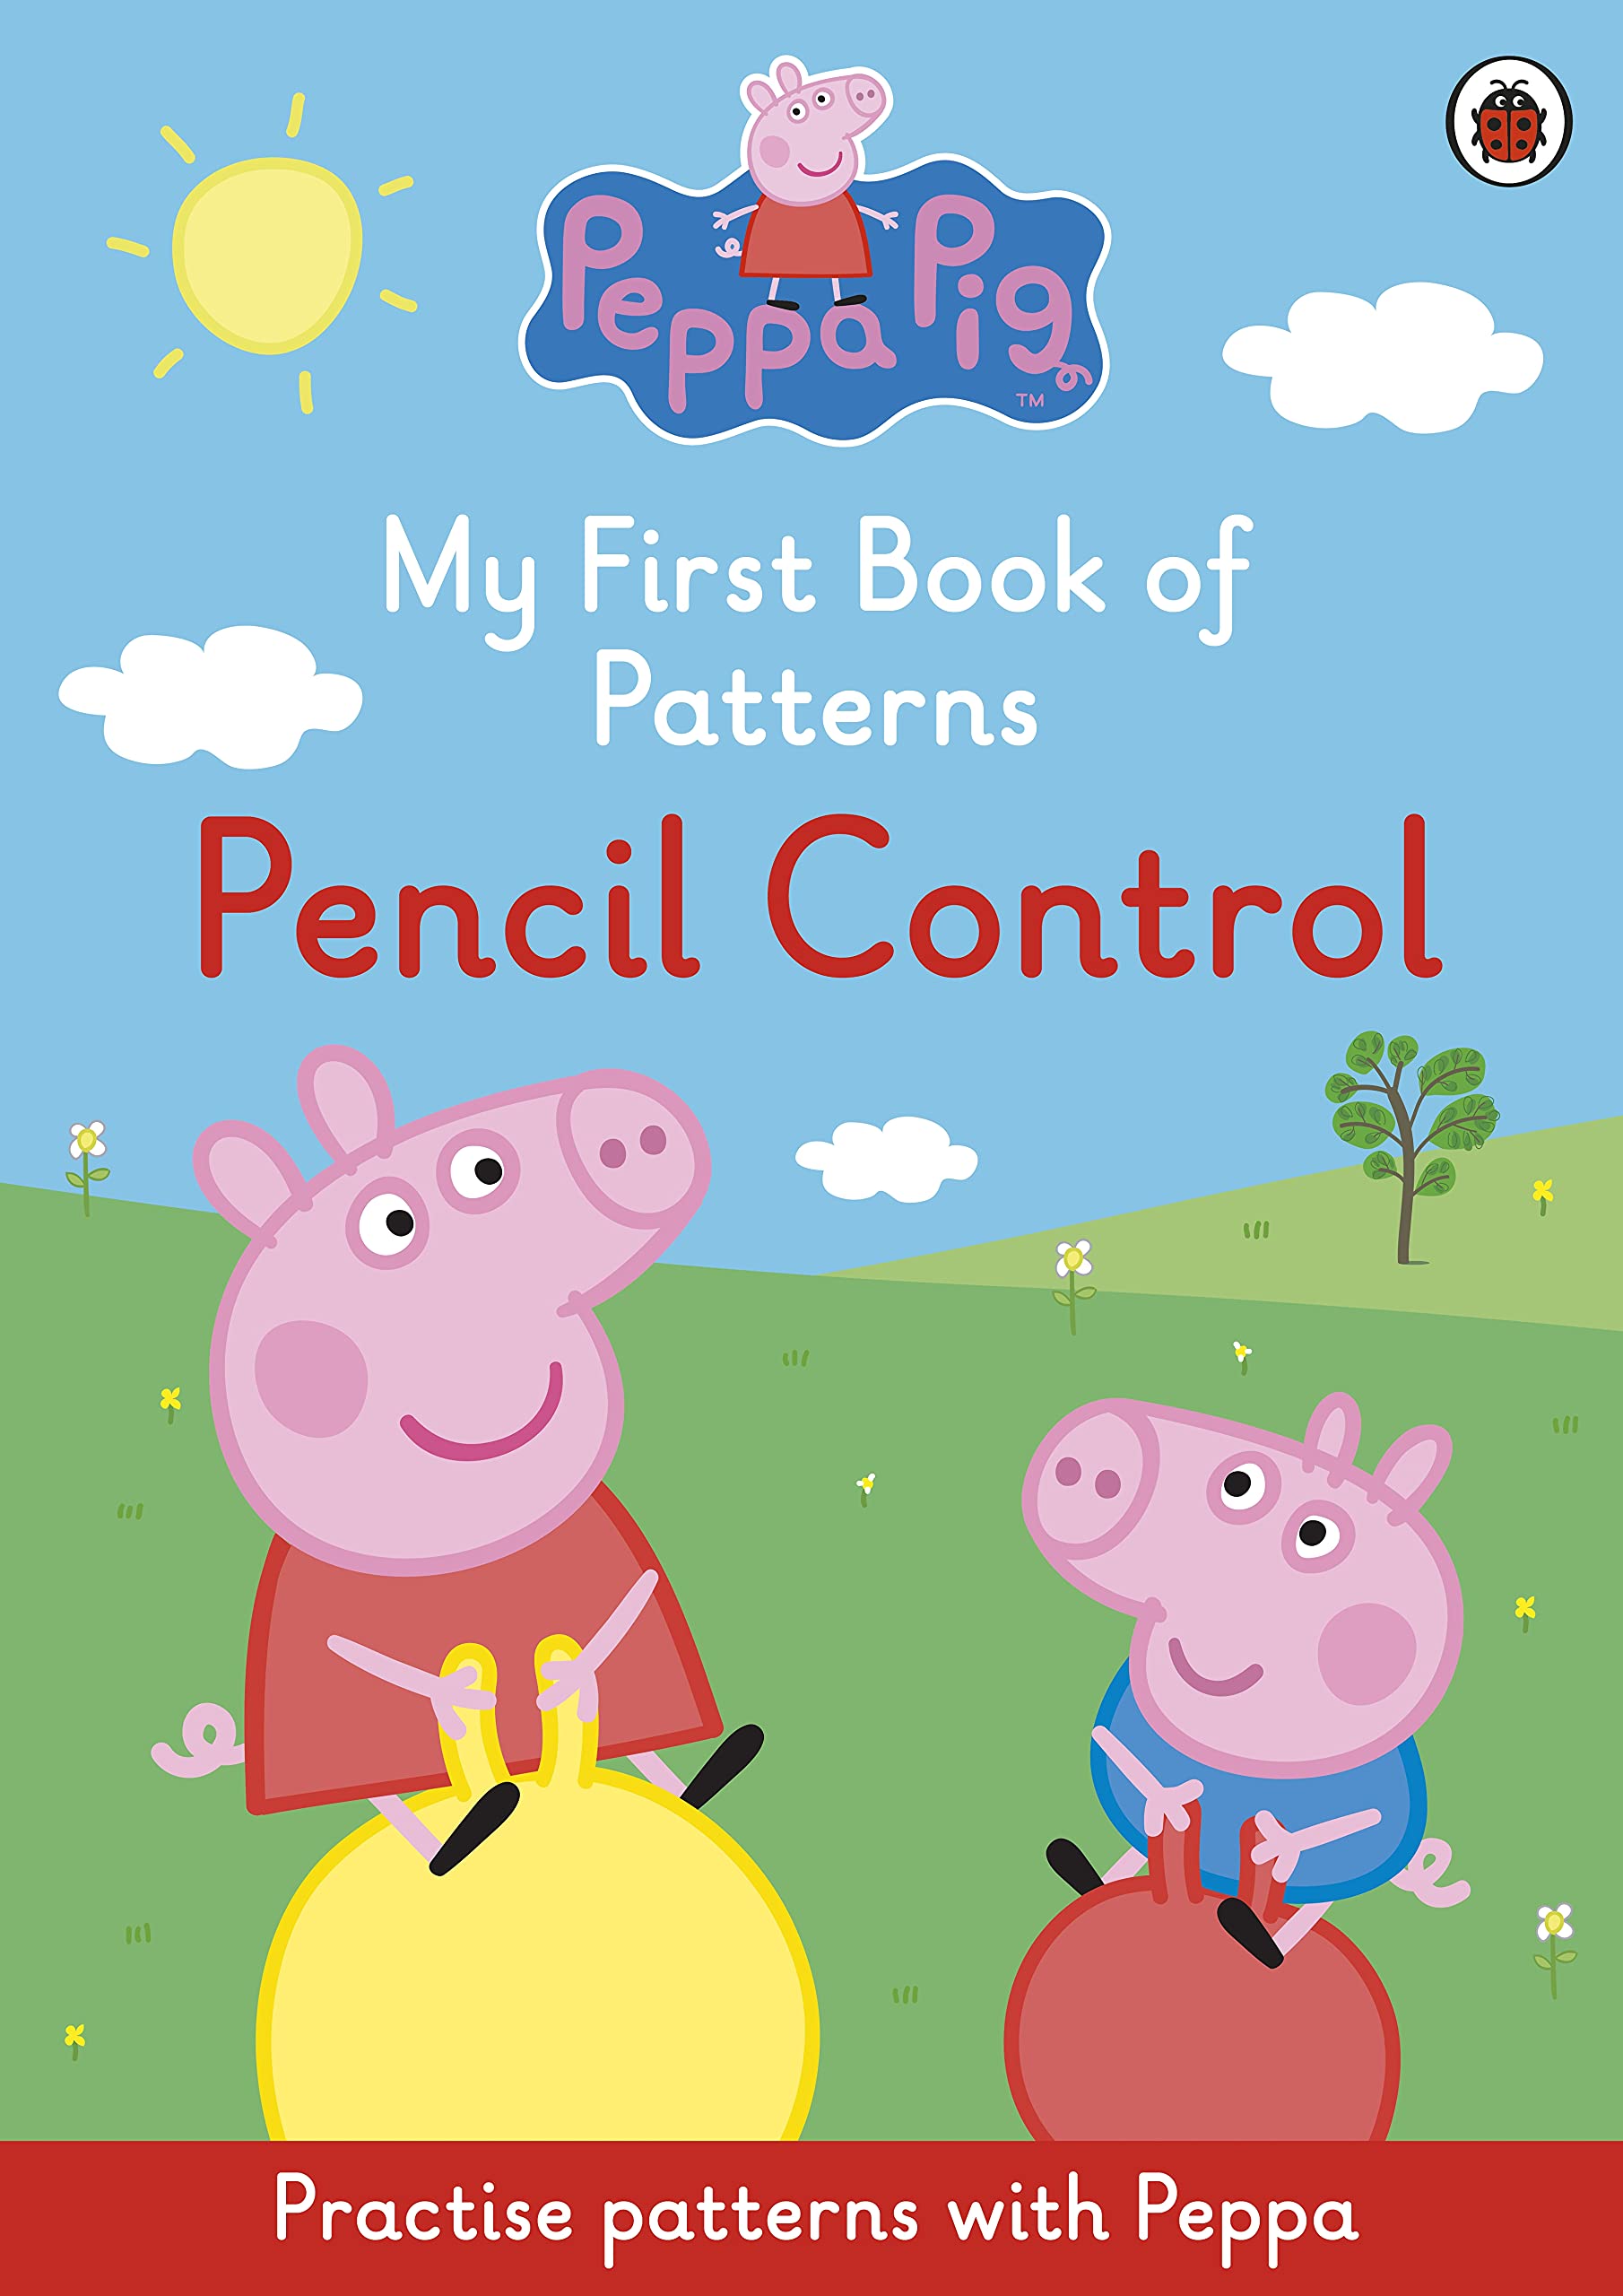 Peppa Pig: My First Book of patterns Pencil control | 